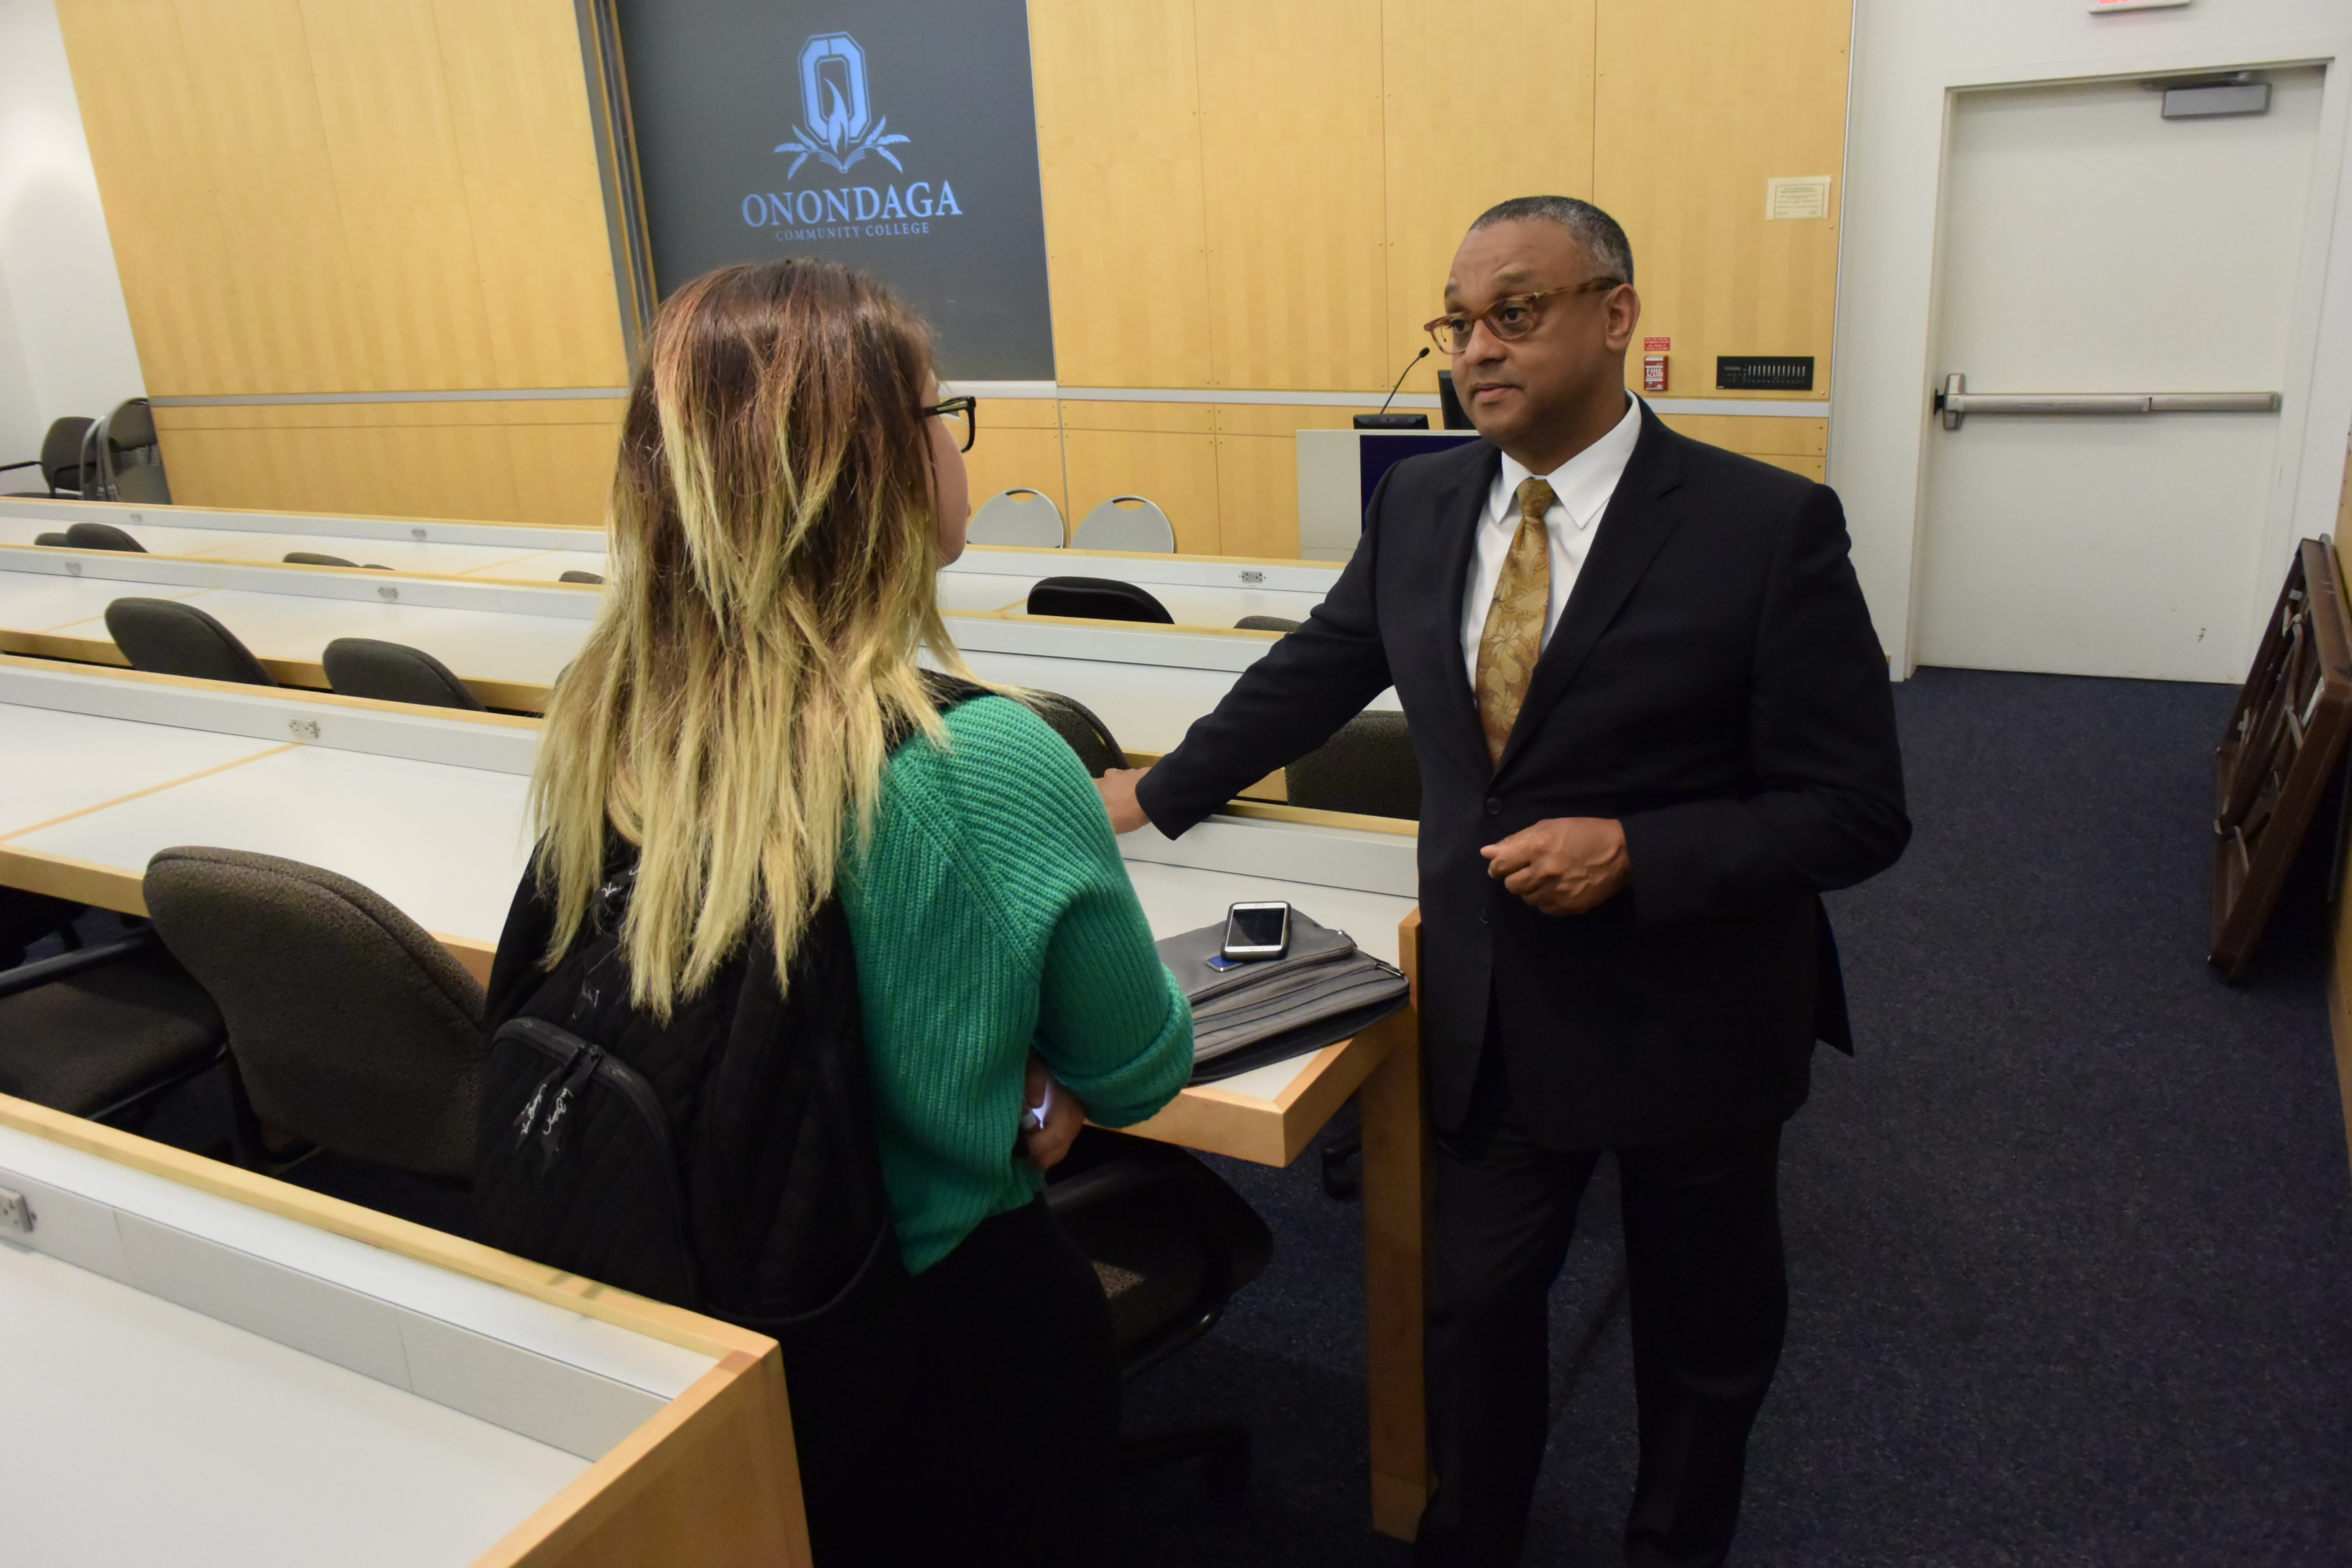 Dr. Dykes '83 talks with OCC student Niki Reyes '15 following his talk.